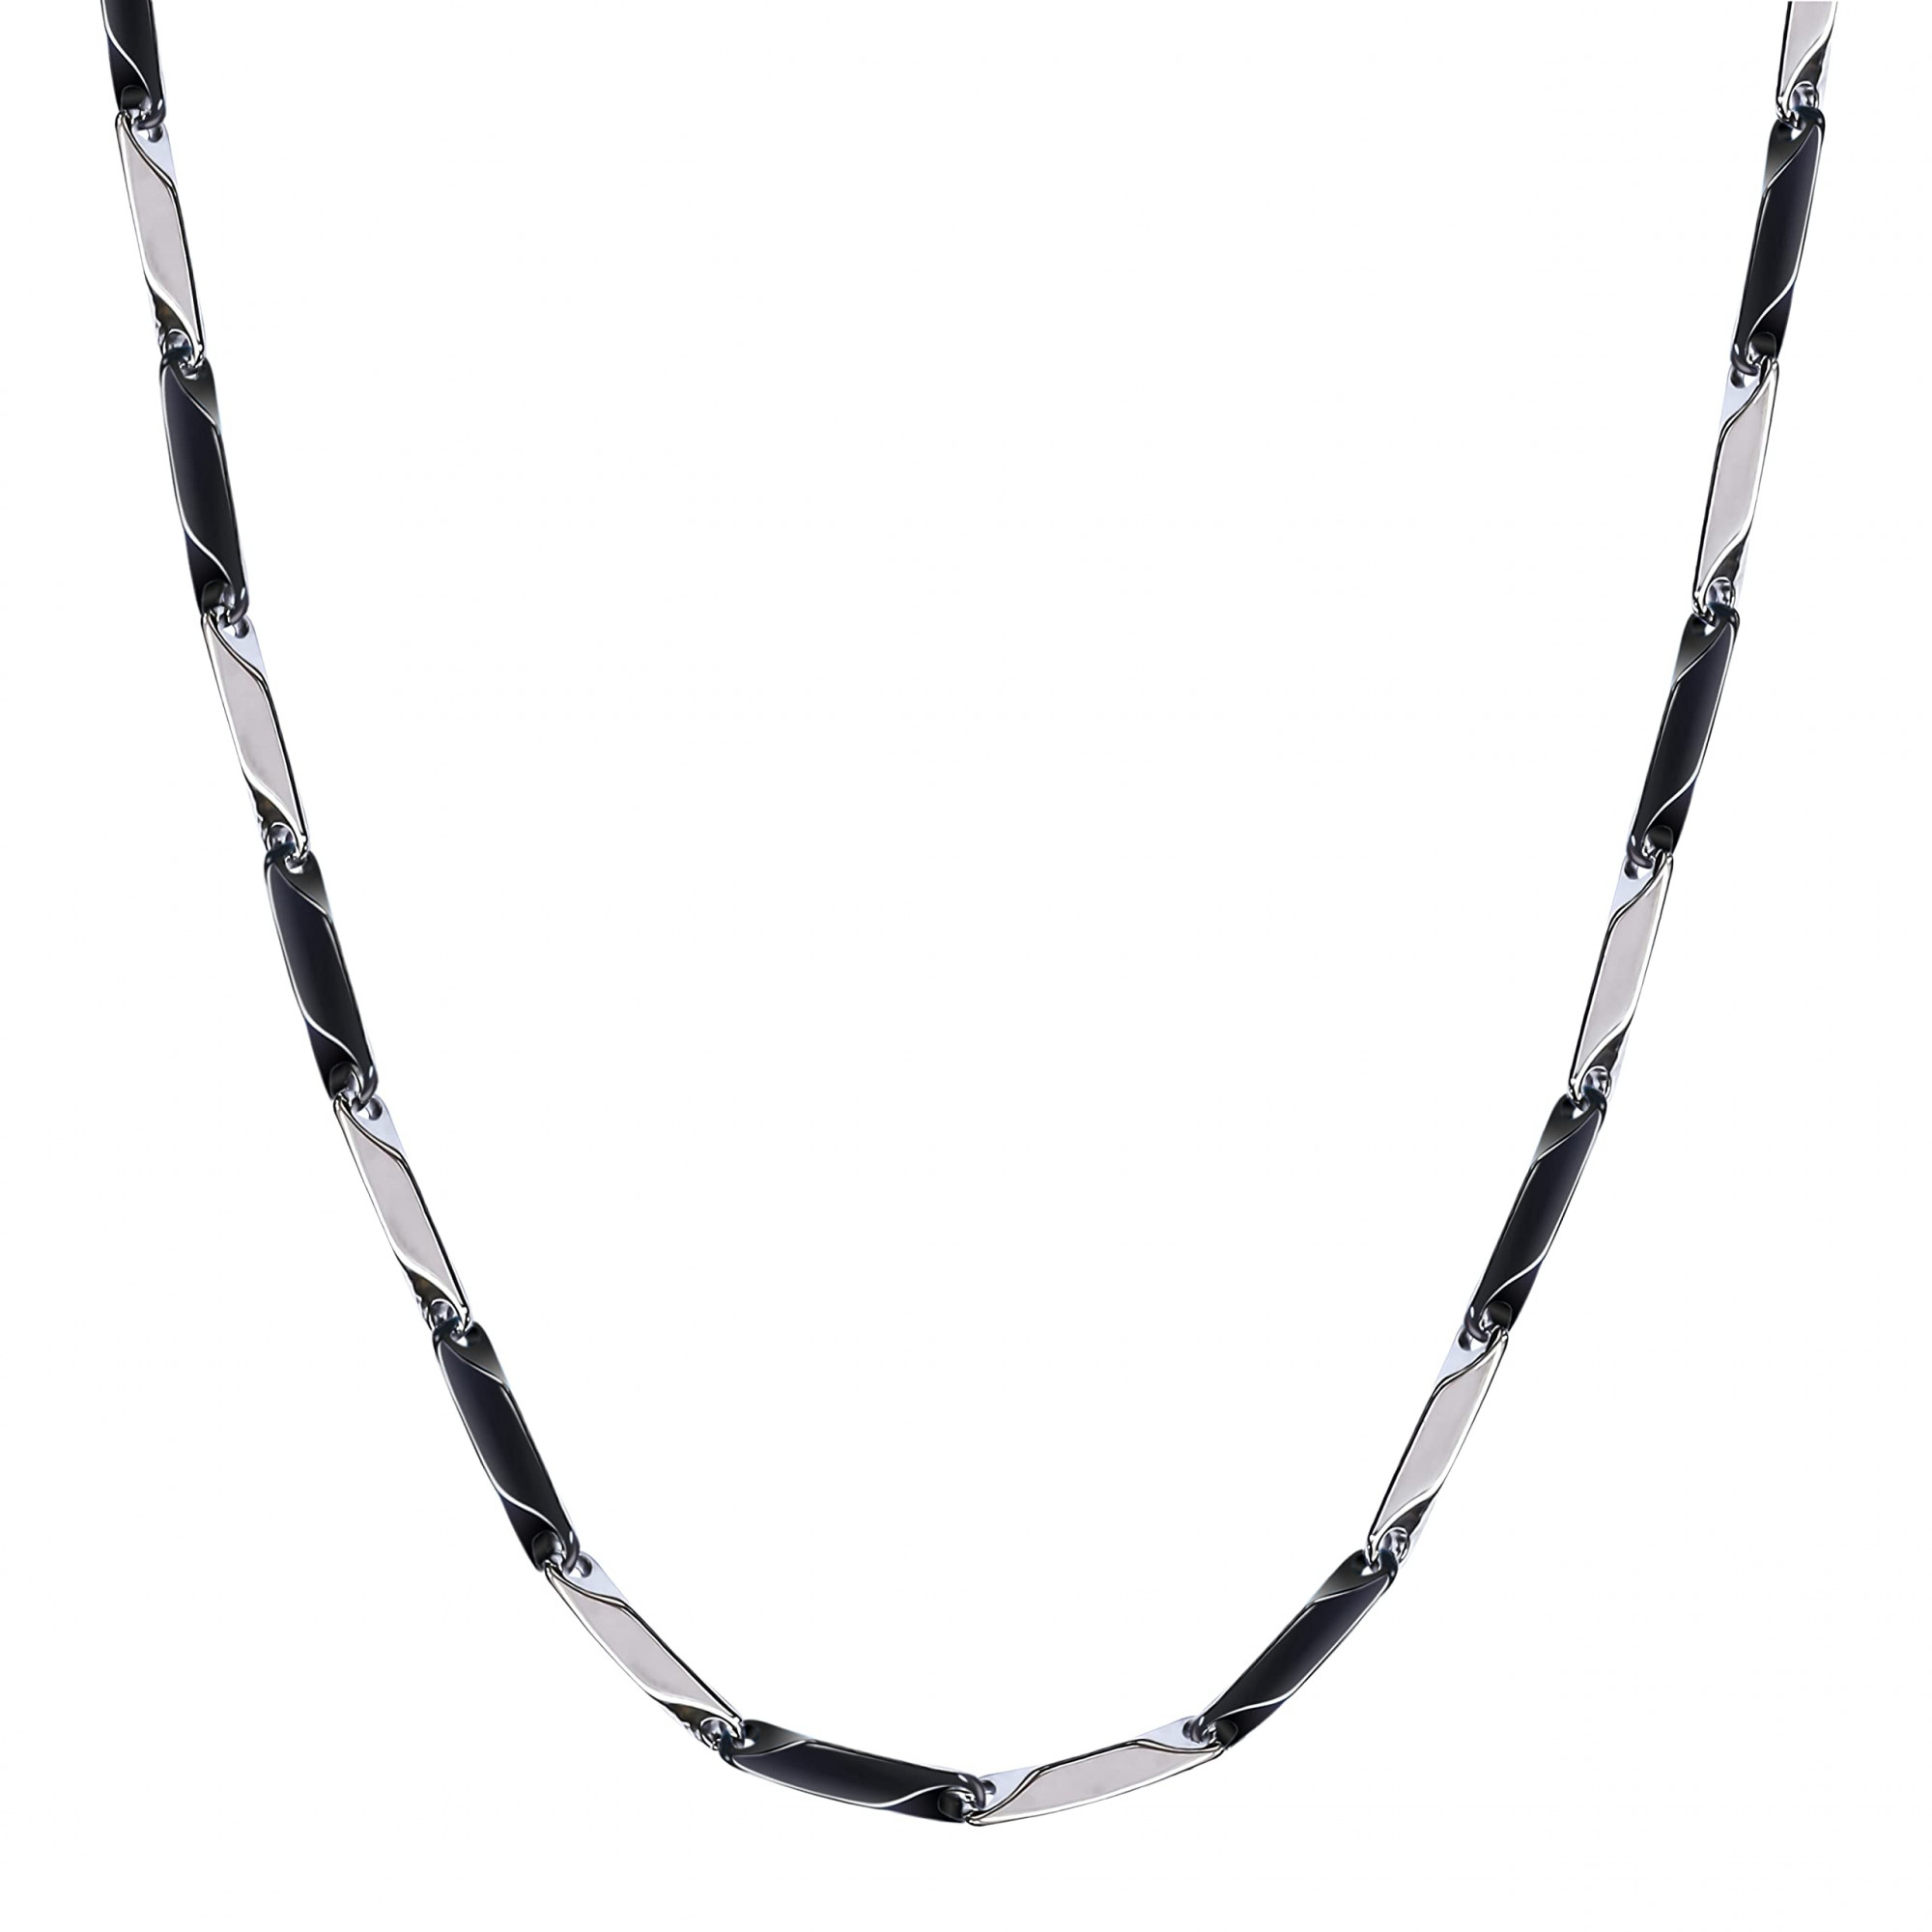 Buy FEEL STYLE Men Silver Plated Chain Necklace Twist Rope Chain for Men  Jewelry 3mm 16 Inch at Amazon.in